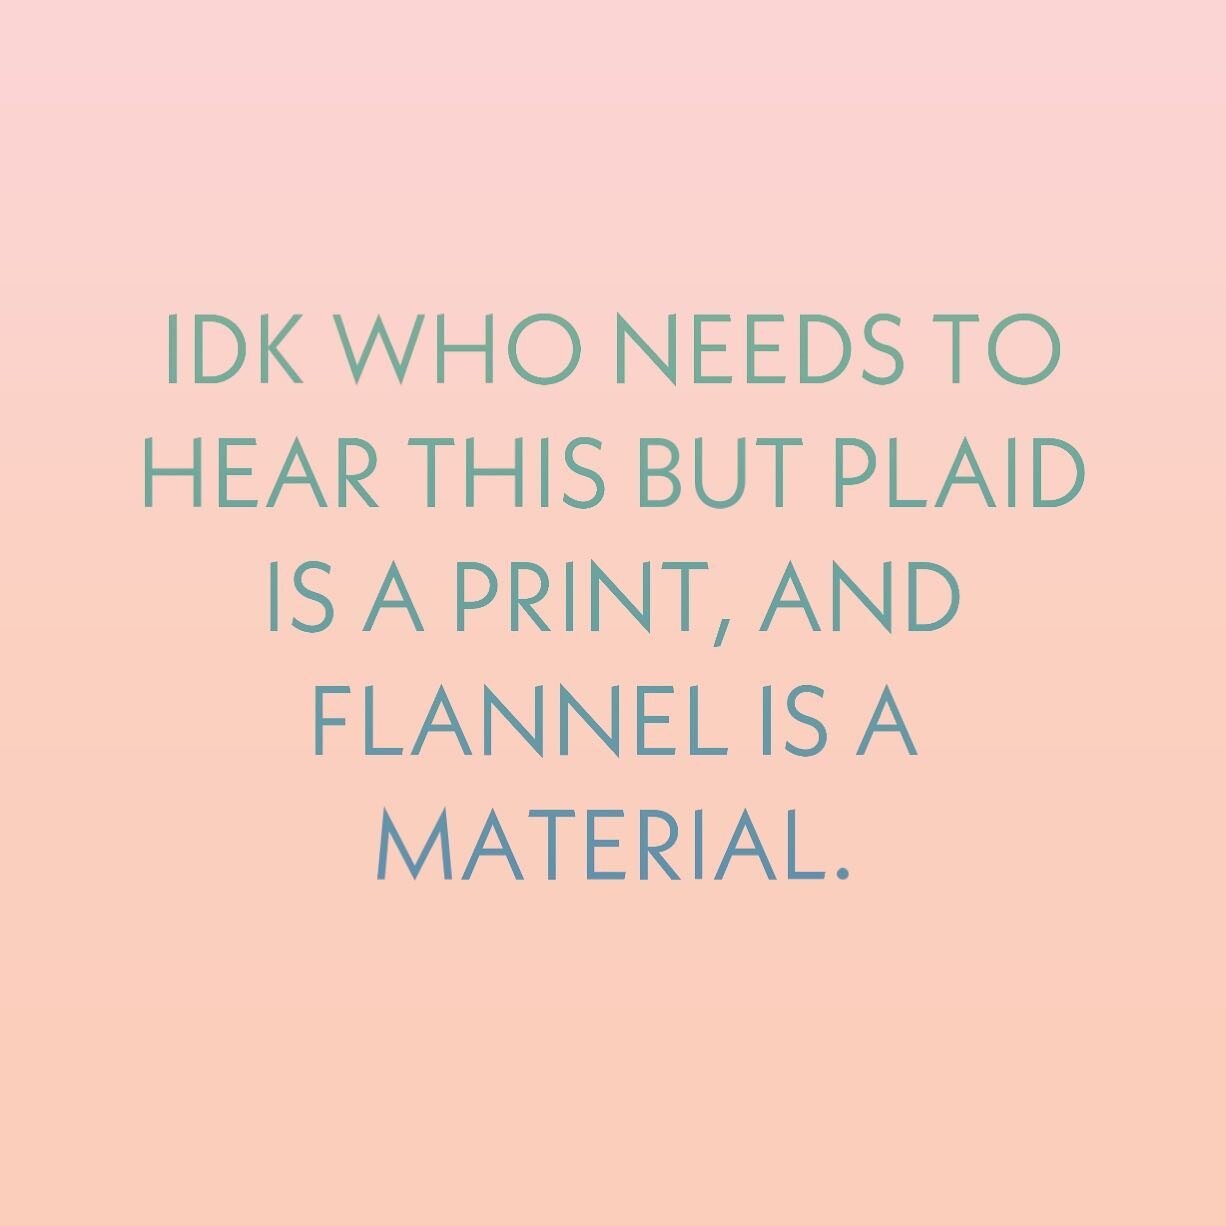 Not all plaids are flannel. Not all flannels are plaid. You&rsquo;re welcome. 
&bull;
&bull;
&bull;
&bull;
&bull;
&bull;
&bull;
&bull;
&bull;
&bull;
&bull;
&bull;

#shopsmallyall #shopscenes #shoplikealocal 
#girlprenuer #prettylittleinspo #thoughtle